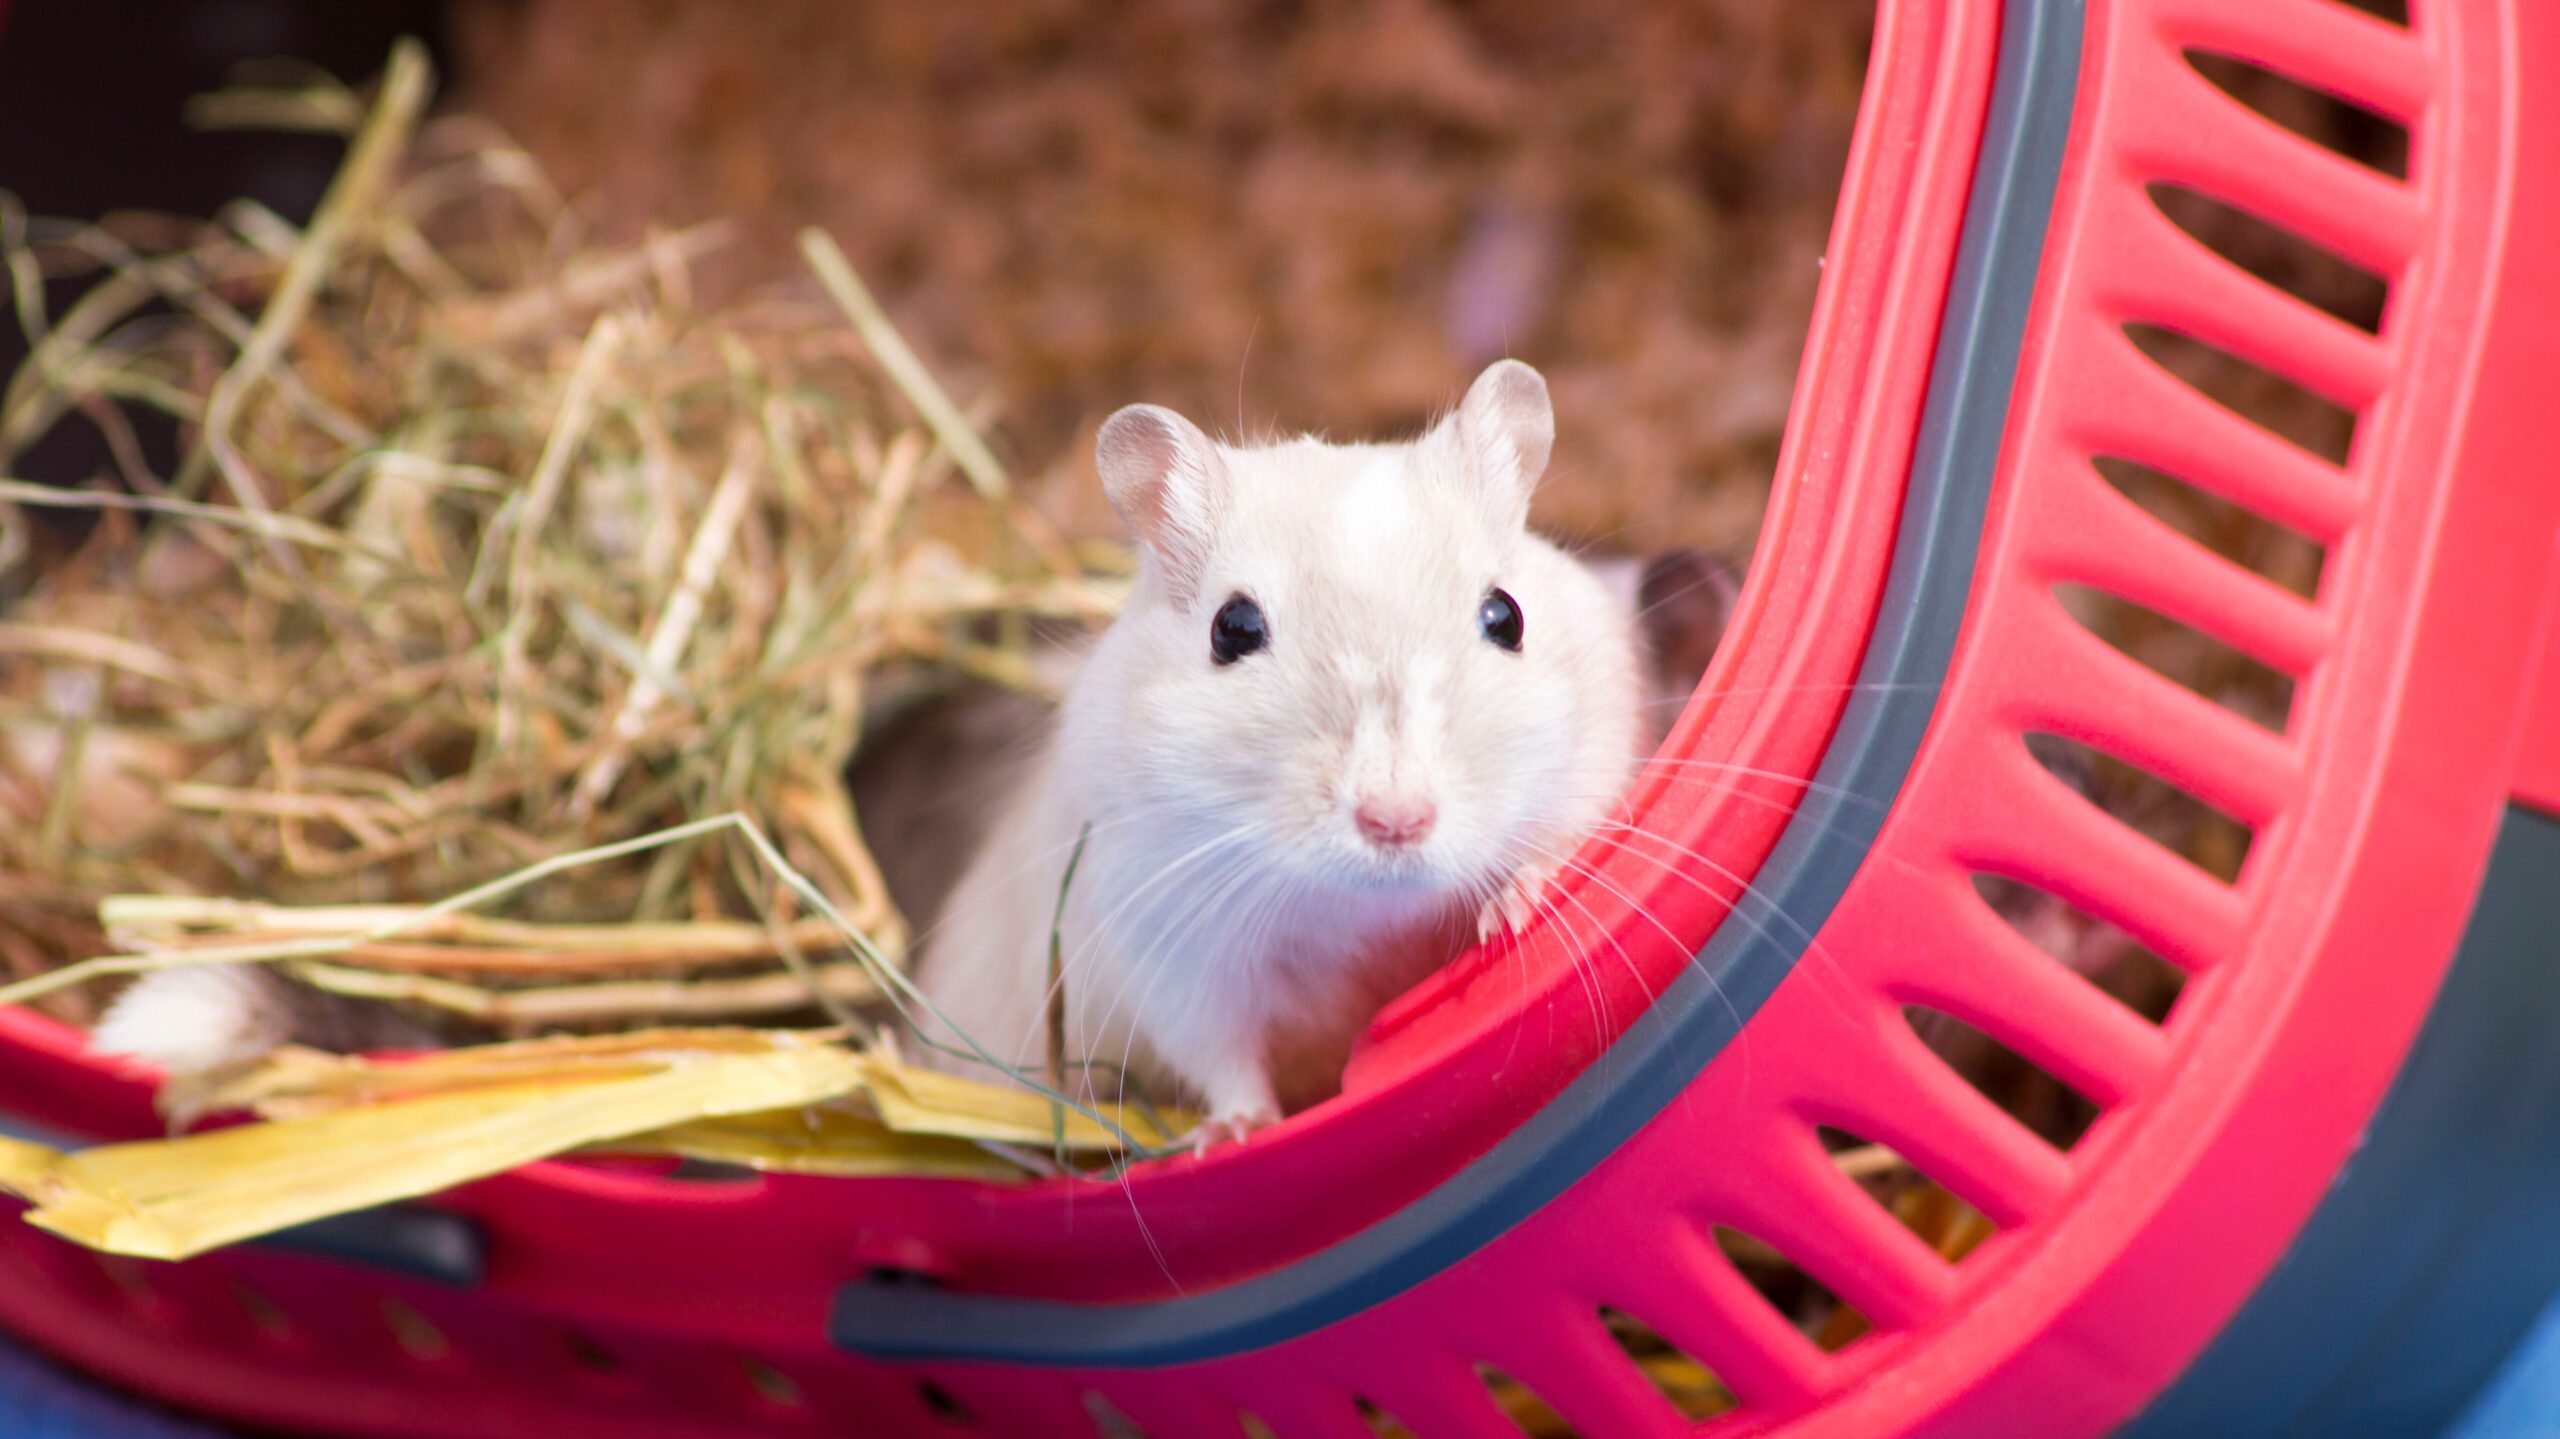 In this blog, we'll explore different rodent species and help you make an informed decision to find the perfect furry friend for you